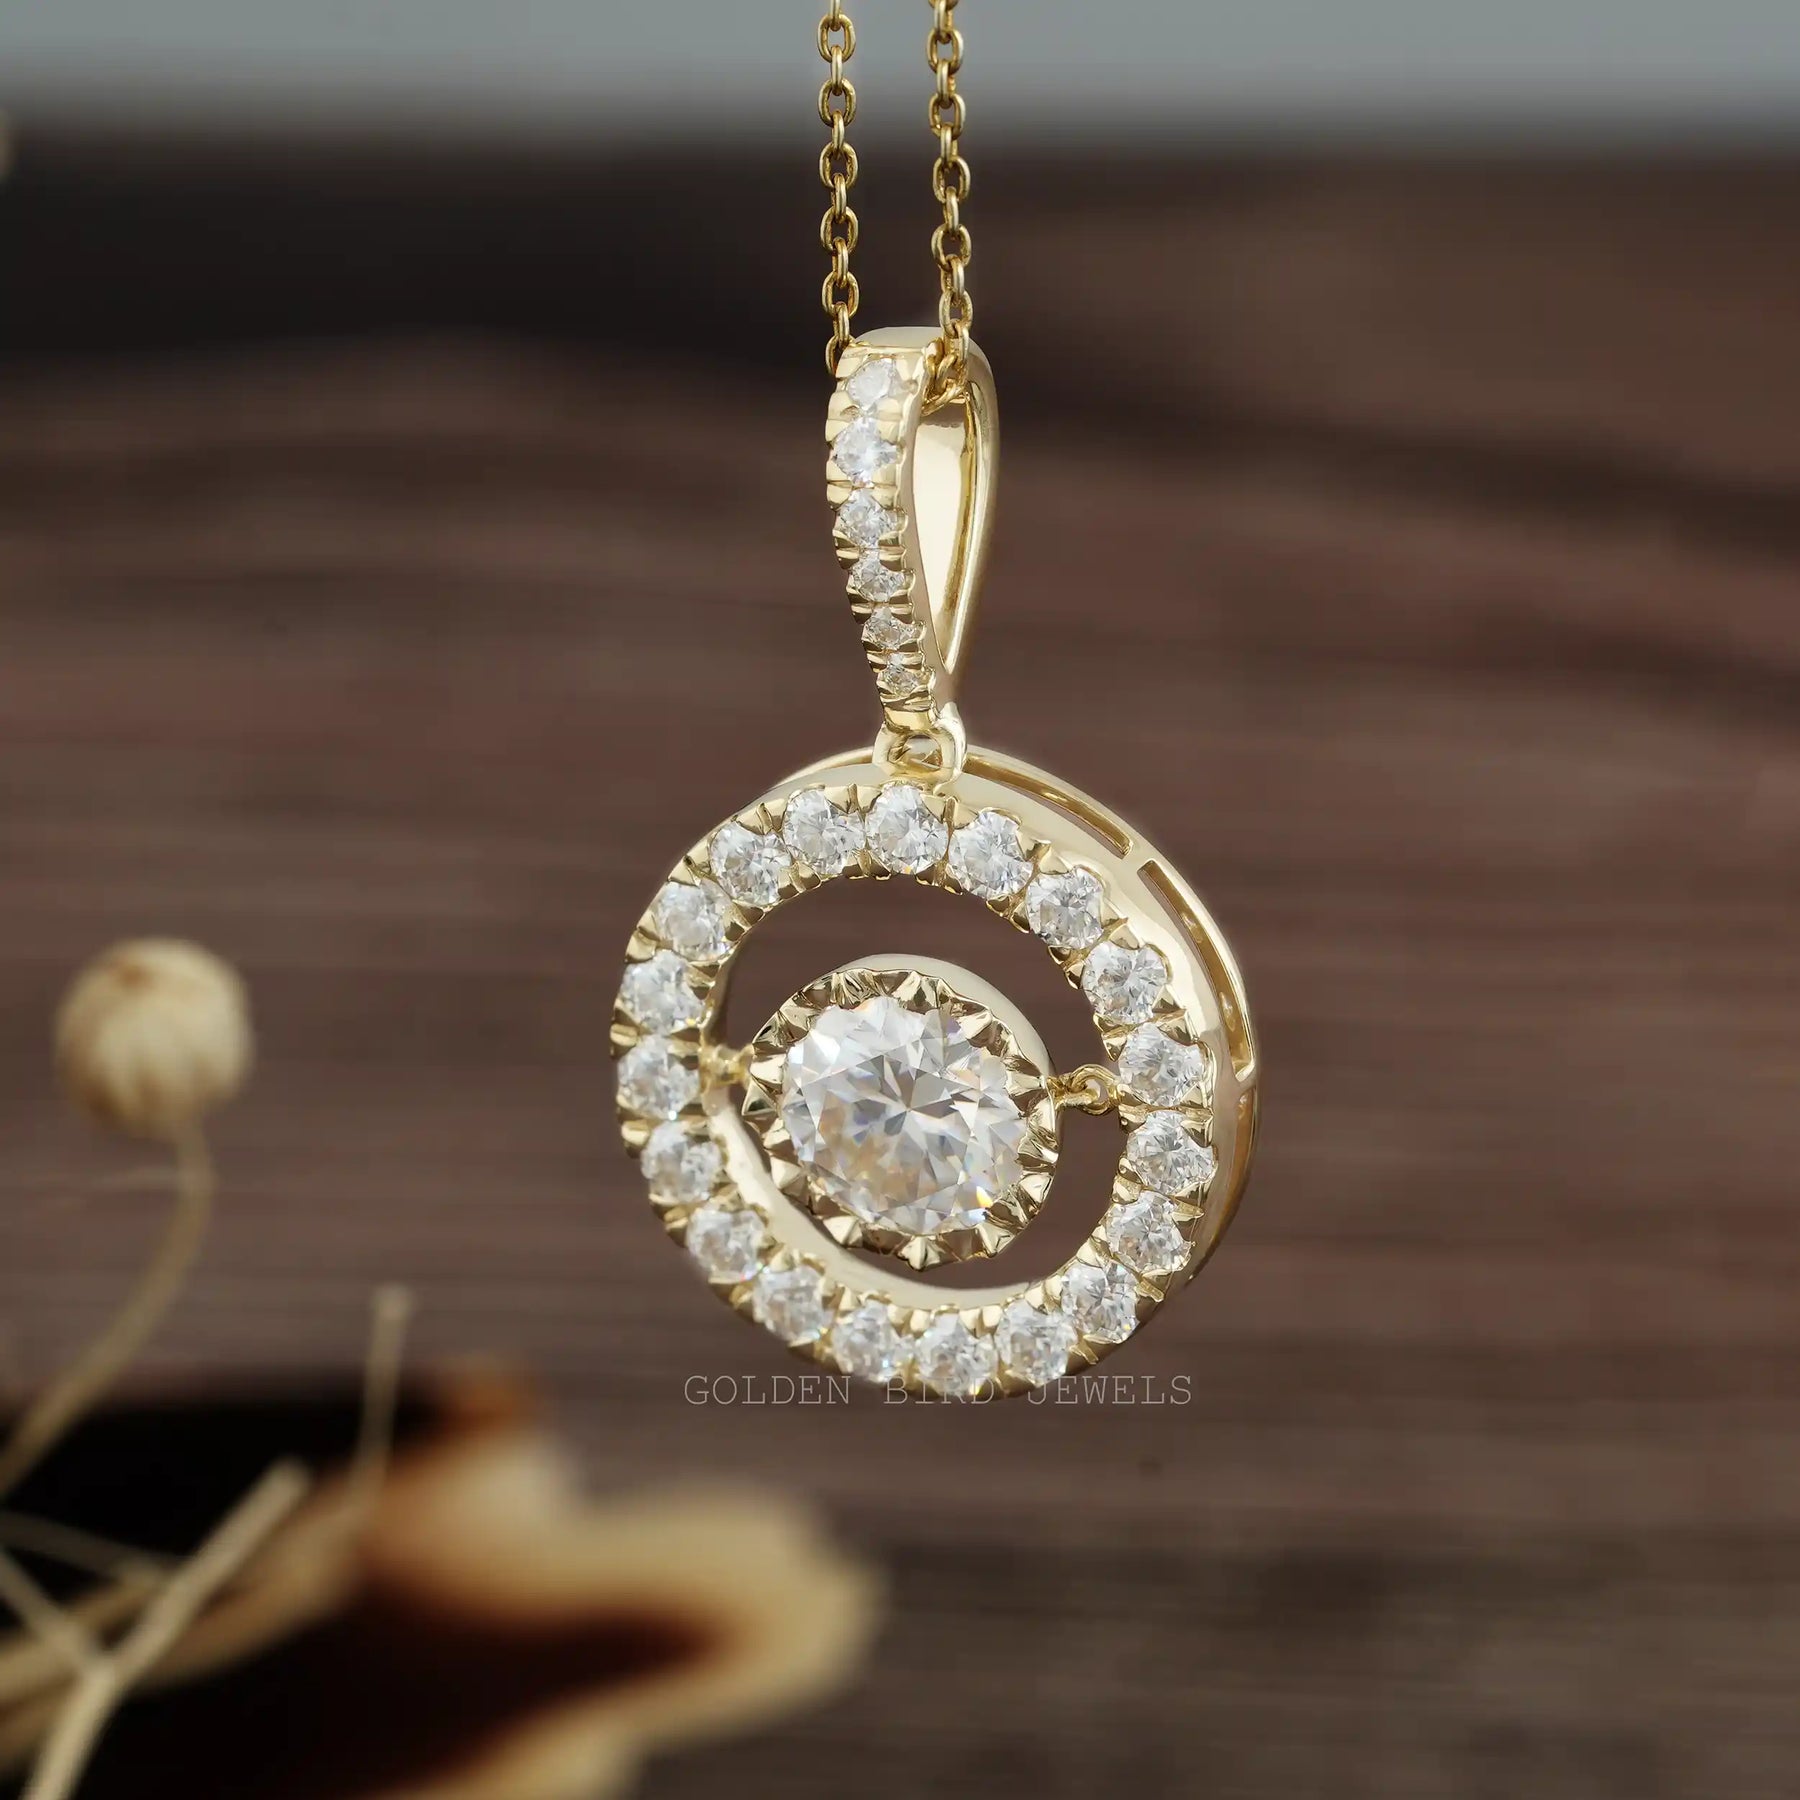 [This round cut pendant set in prong setting]-[Golden Bird Jewels]